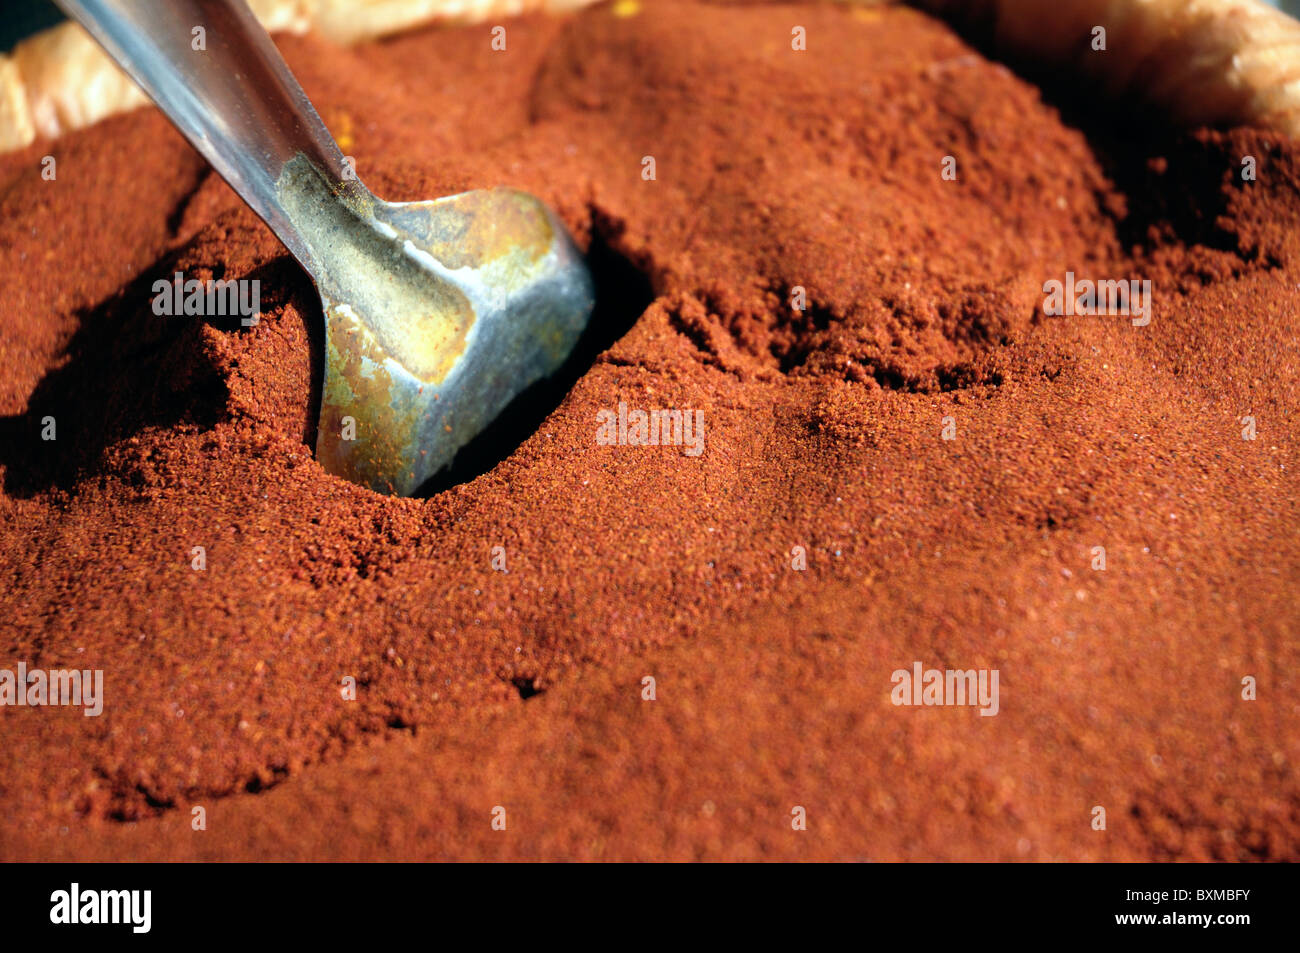 Firey Indian cooking spices at market. Stock Photo